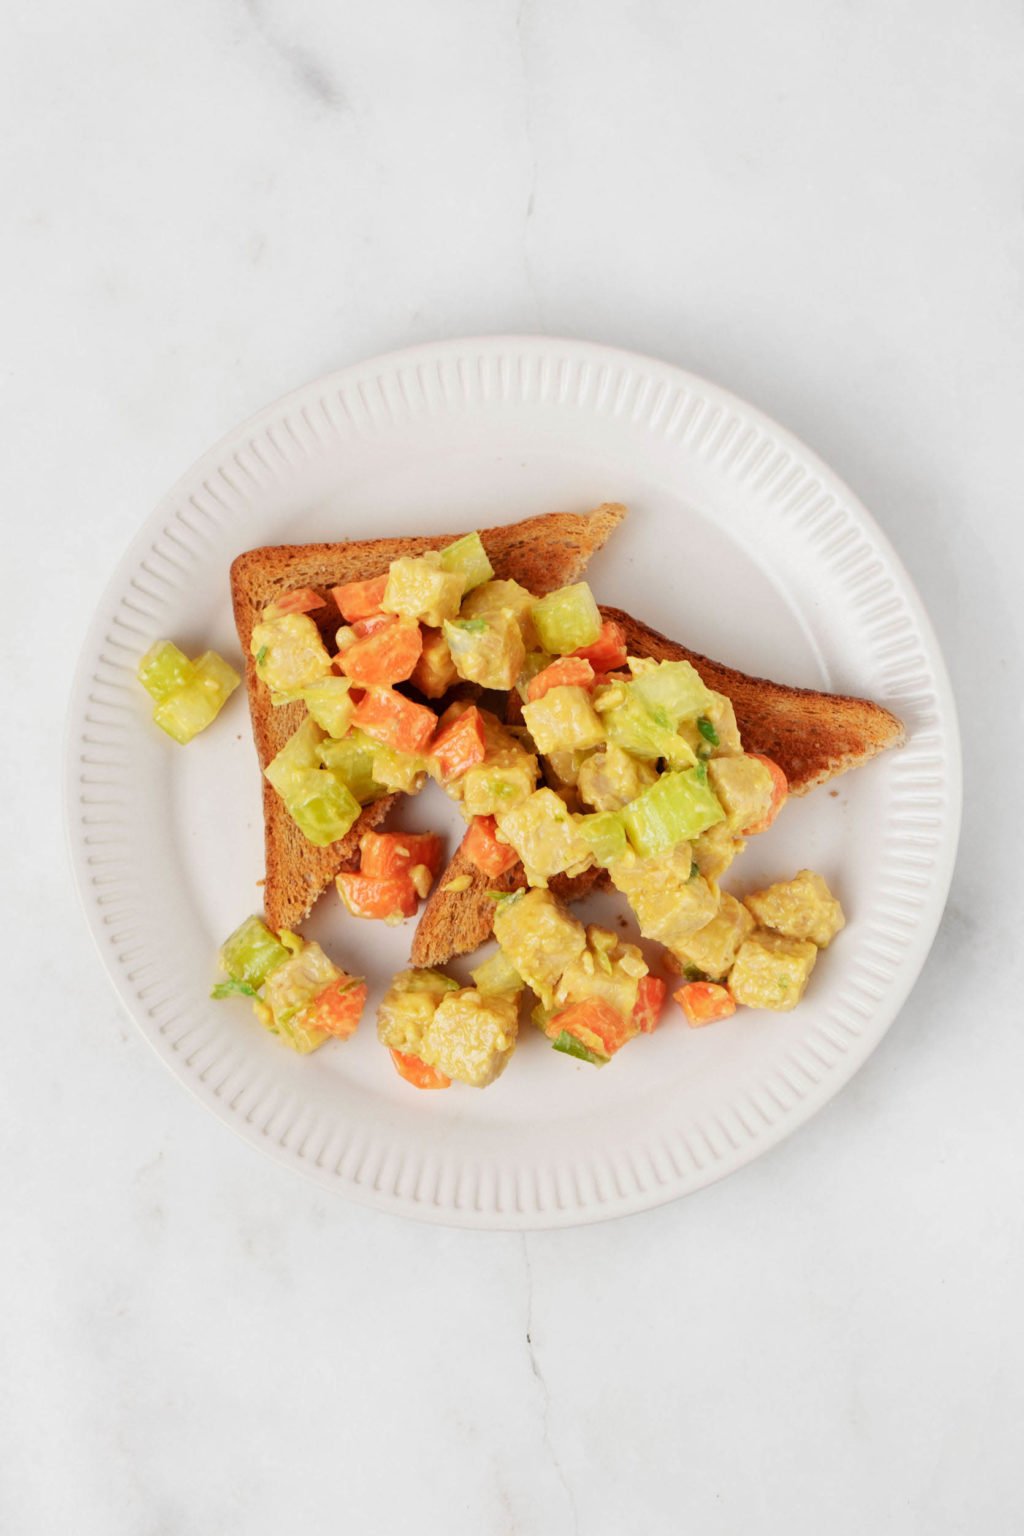 Two slices of toast have been topped with a protein and vegetables. The toast is served on a round white plate.